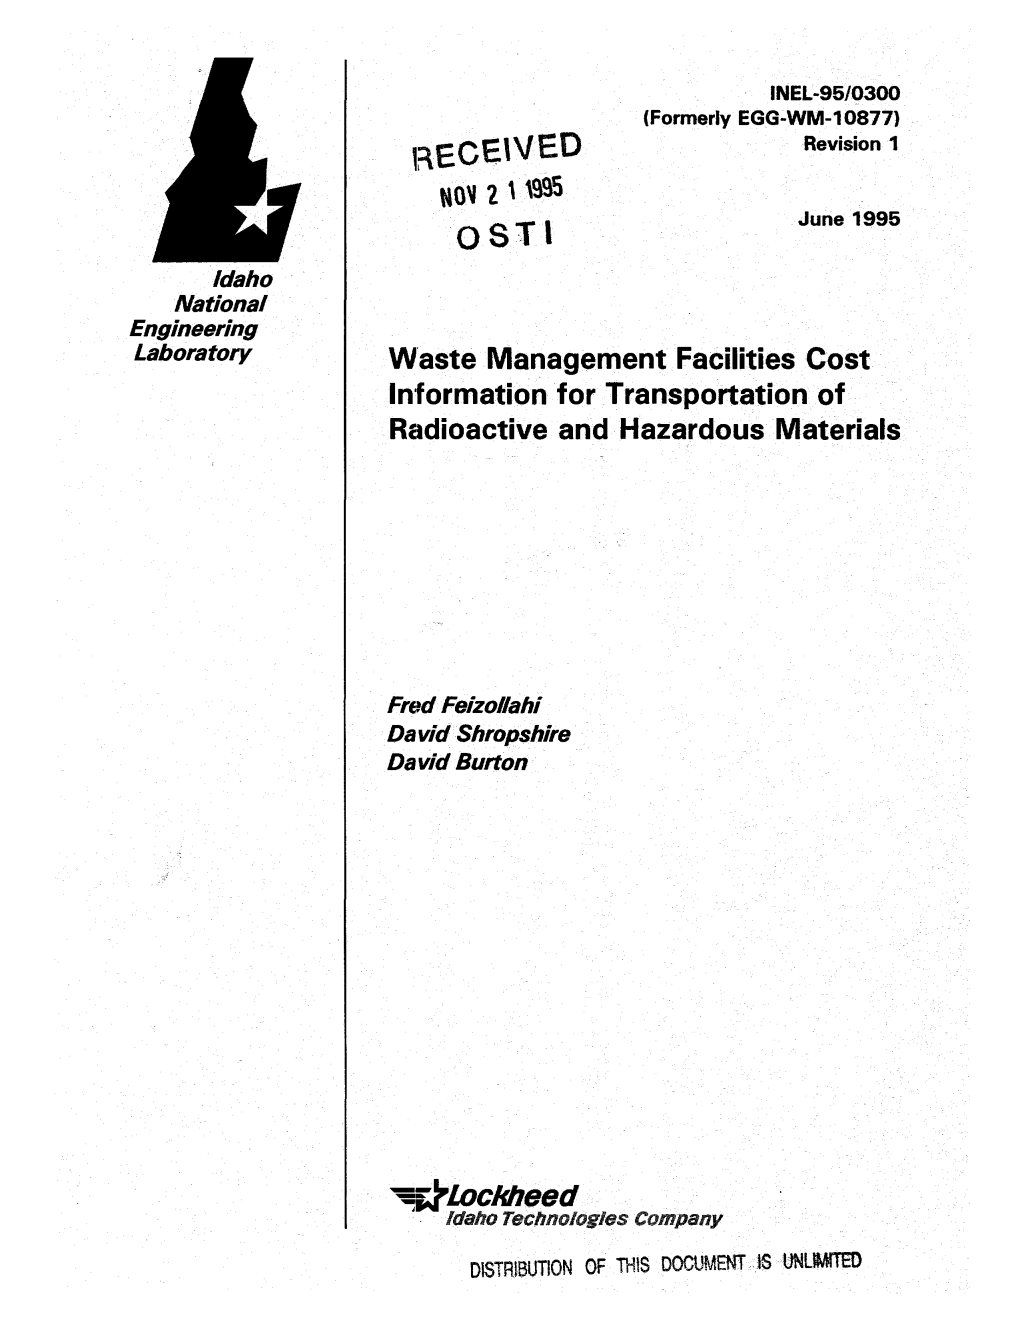 Waste Management Facilities Cost Information for Transportation of Radioactive and Hazardous Materials